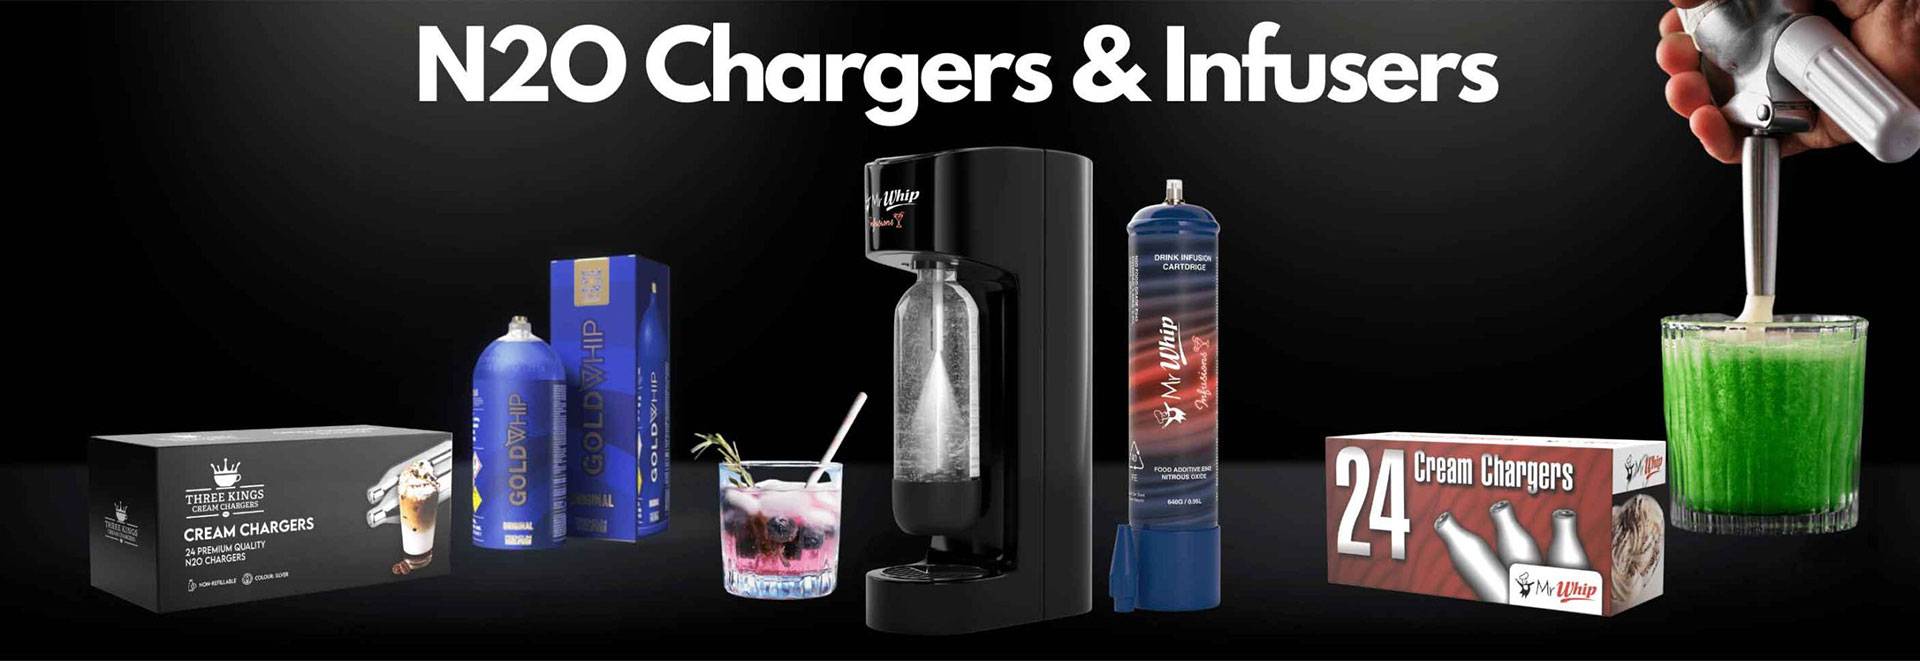 n2o chargers and infusers